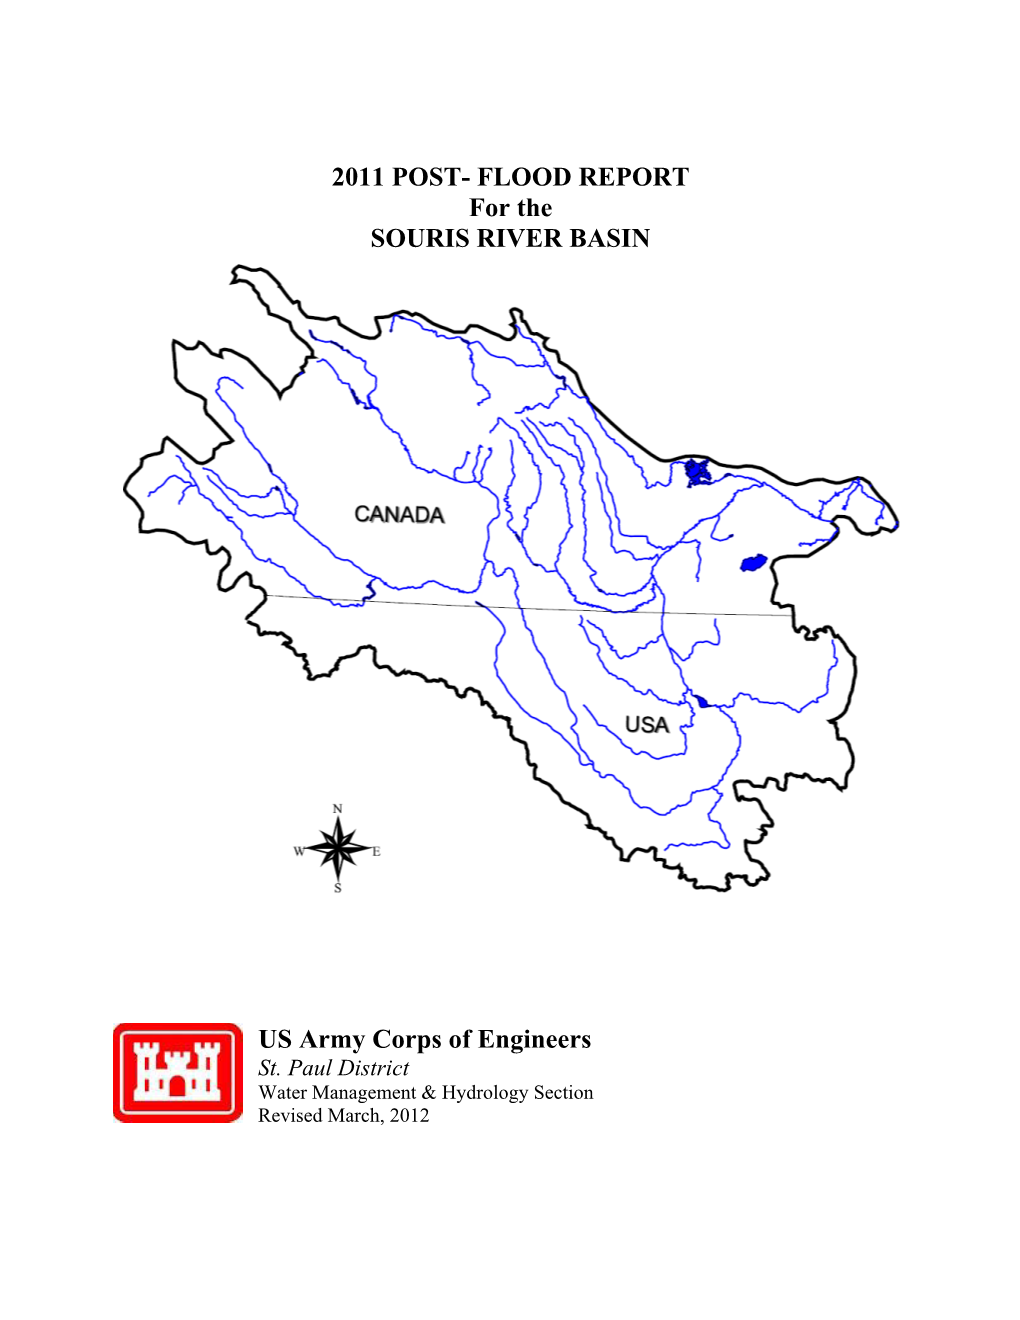 2011 Post-Flood Report for the Souris River Basin – Revised March 2012 Page I 8